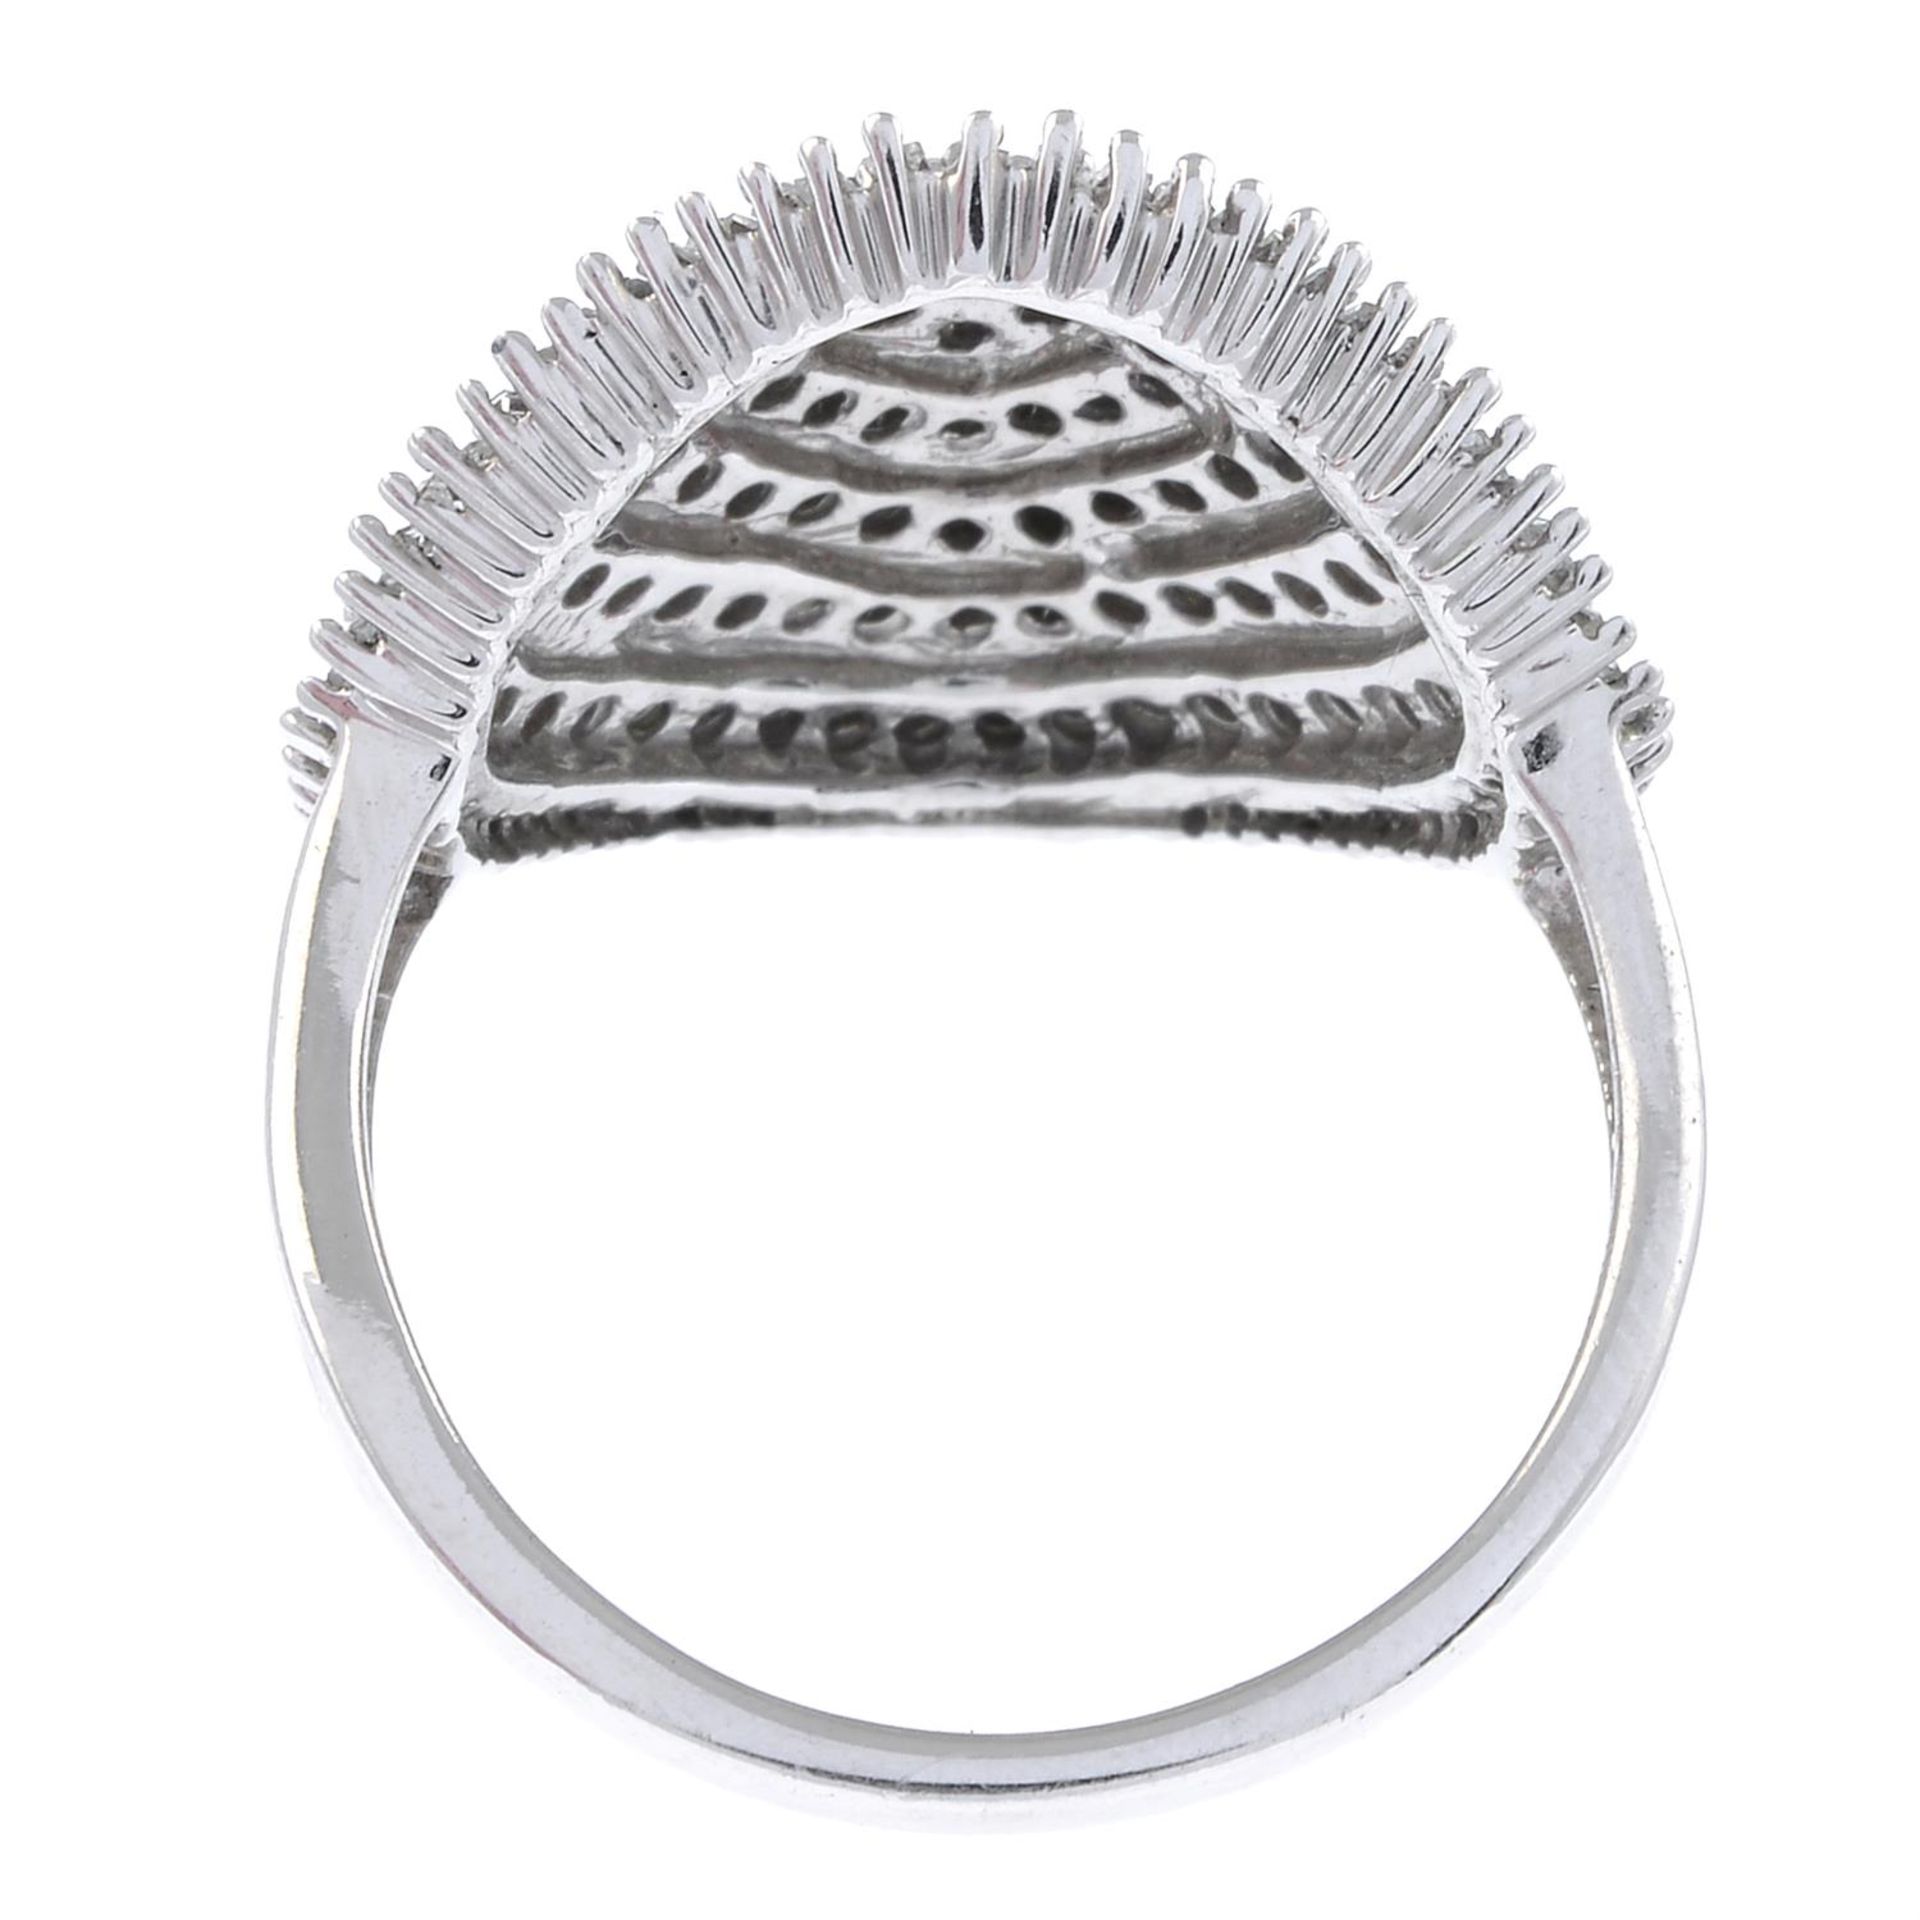 9ct gold diamond cocktail ring - Image 2 of 2